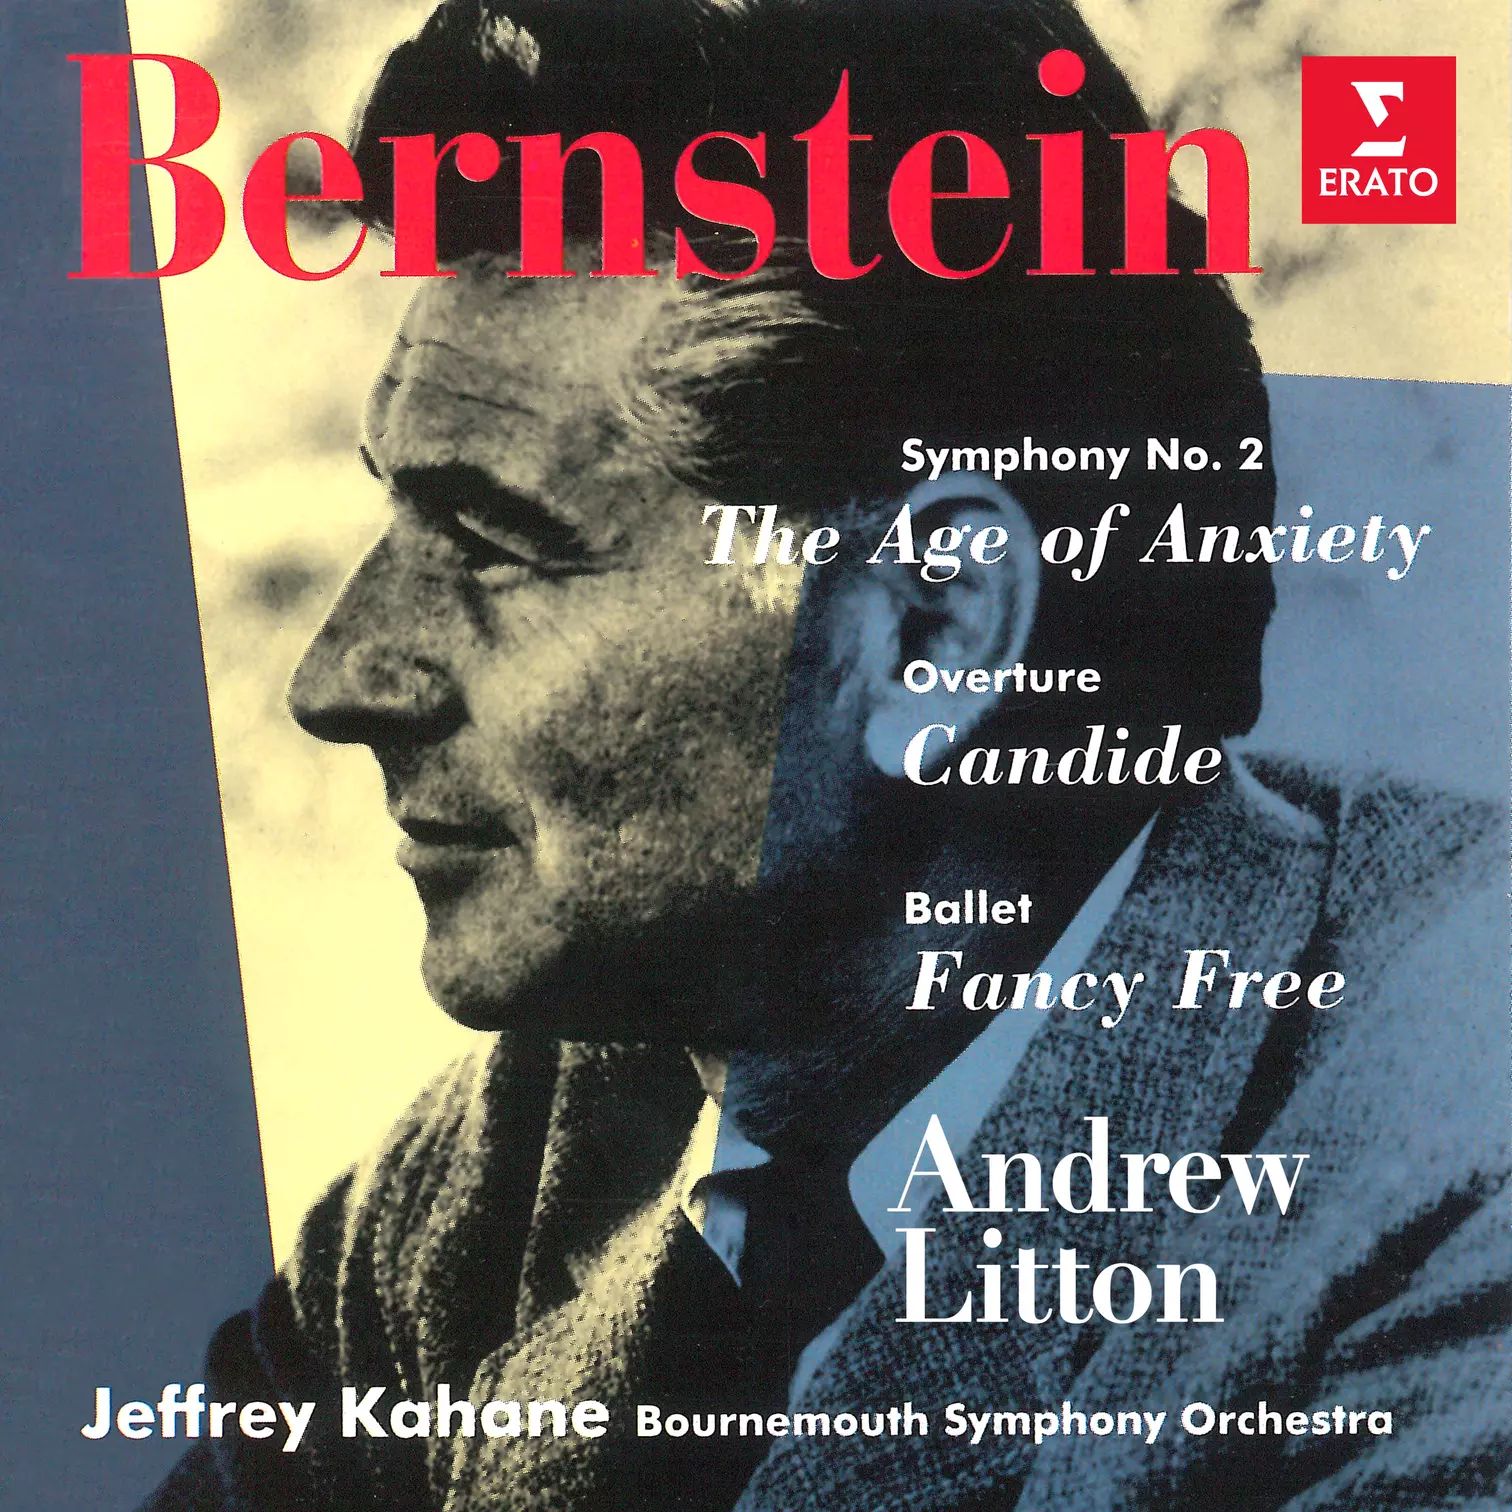 Bernstein: Symphony No. 2 “The Age of Anxiety”, Overture from Candide & Fancy Free